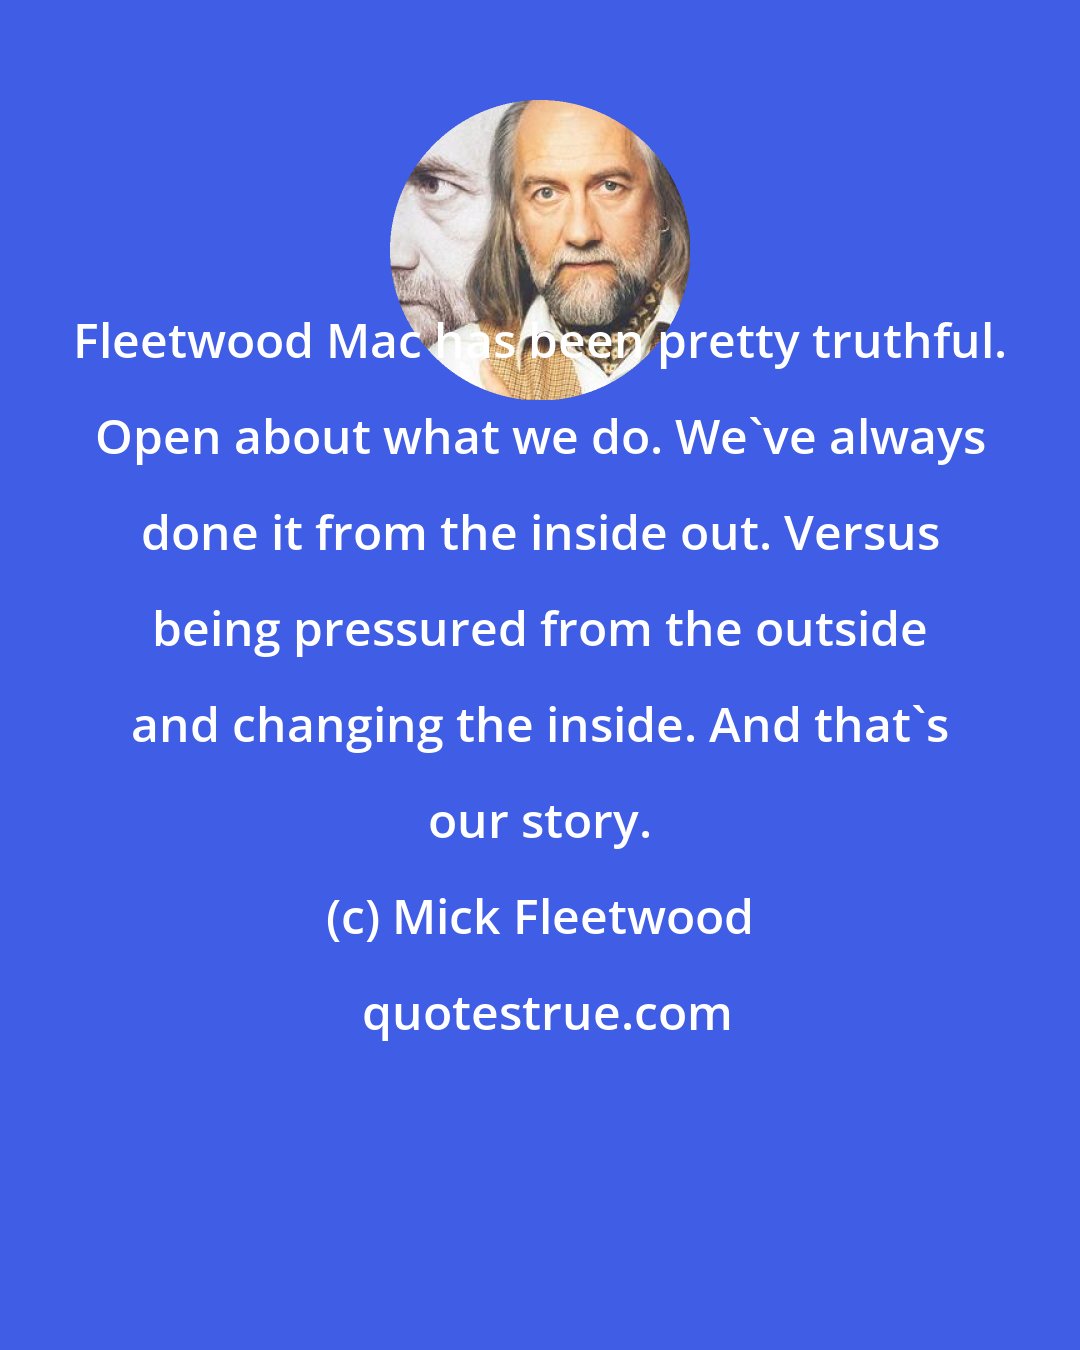 Mick Fleetwood: Fleetwood Mac has been pretty truthful. Open about what we do. We've always done it from the inside out. Versus being pressured from the outside and changing the inside. And that's our story.